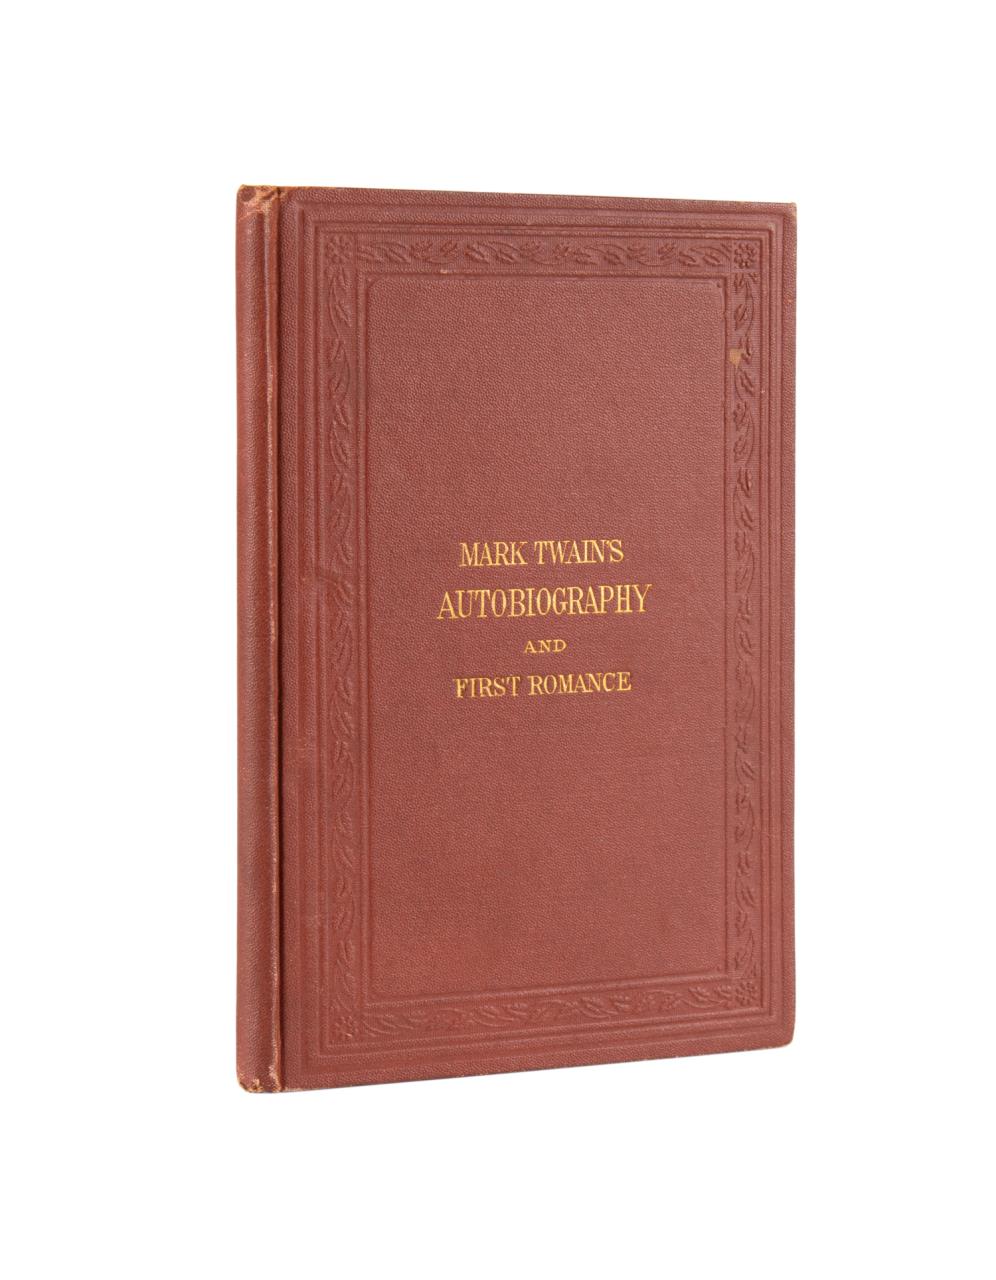 MARK TWAIN, AUTOBIOGRAPHY AND FIRST